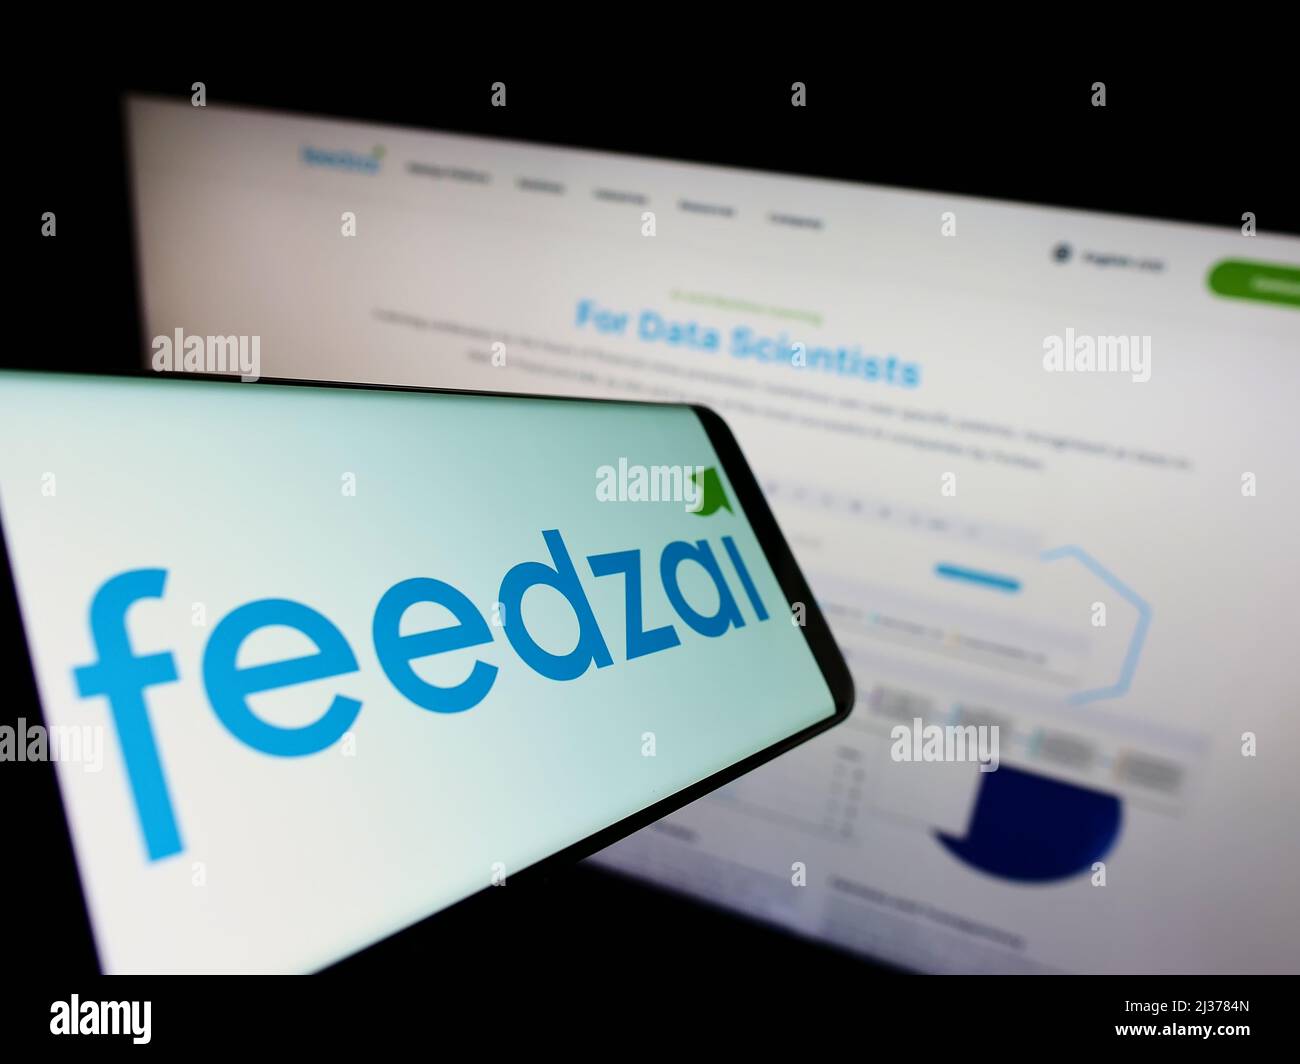 Cellphone with logo of Portuguese risk management company Feedzai on screen in front of business website. Focus on center-right of phone display. Stock Photo